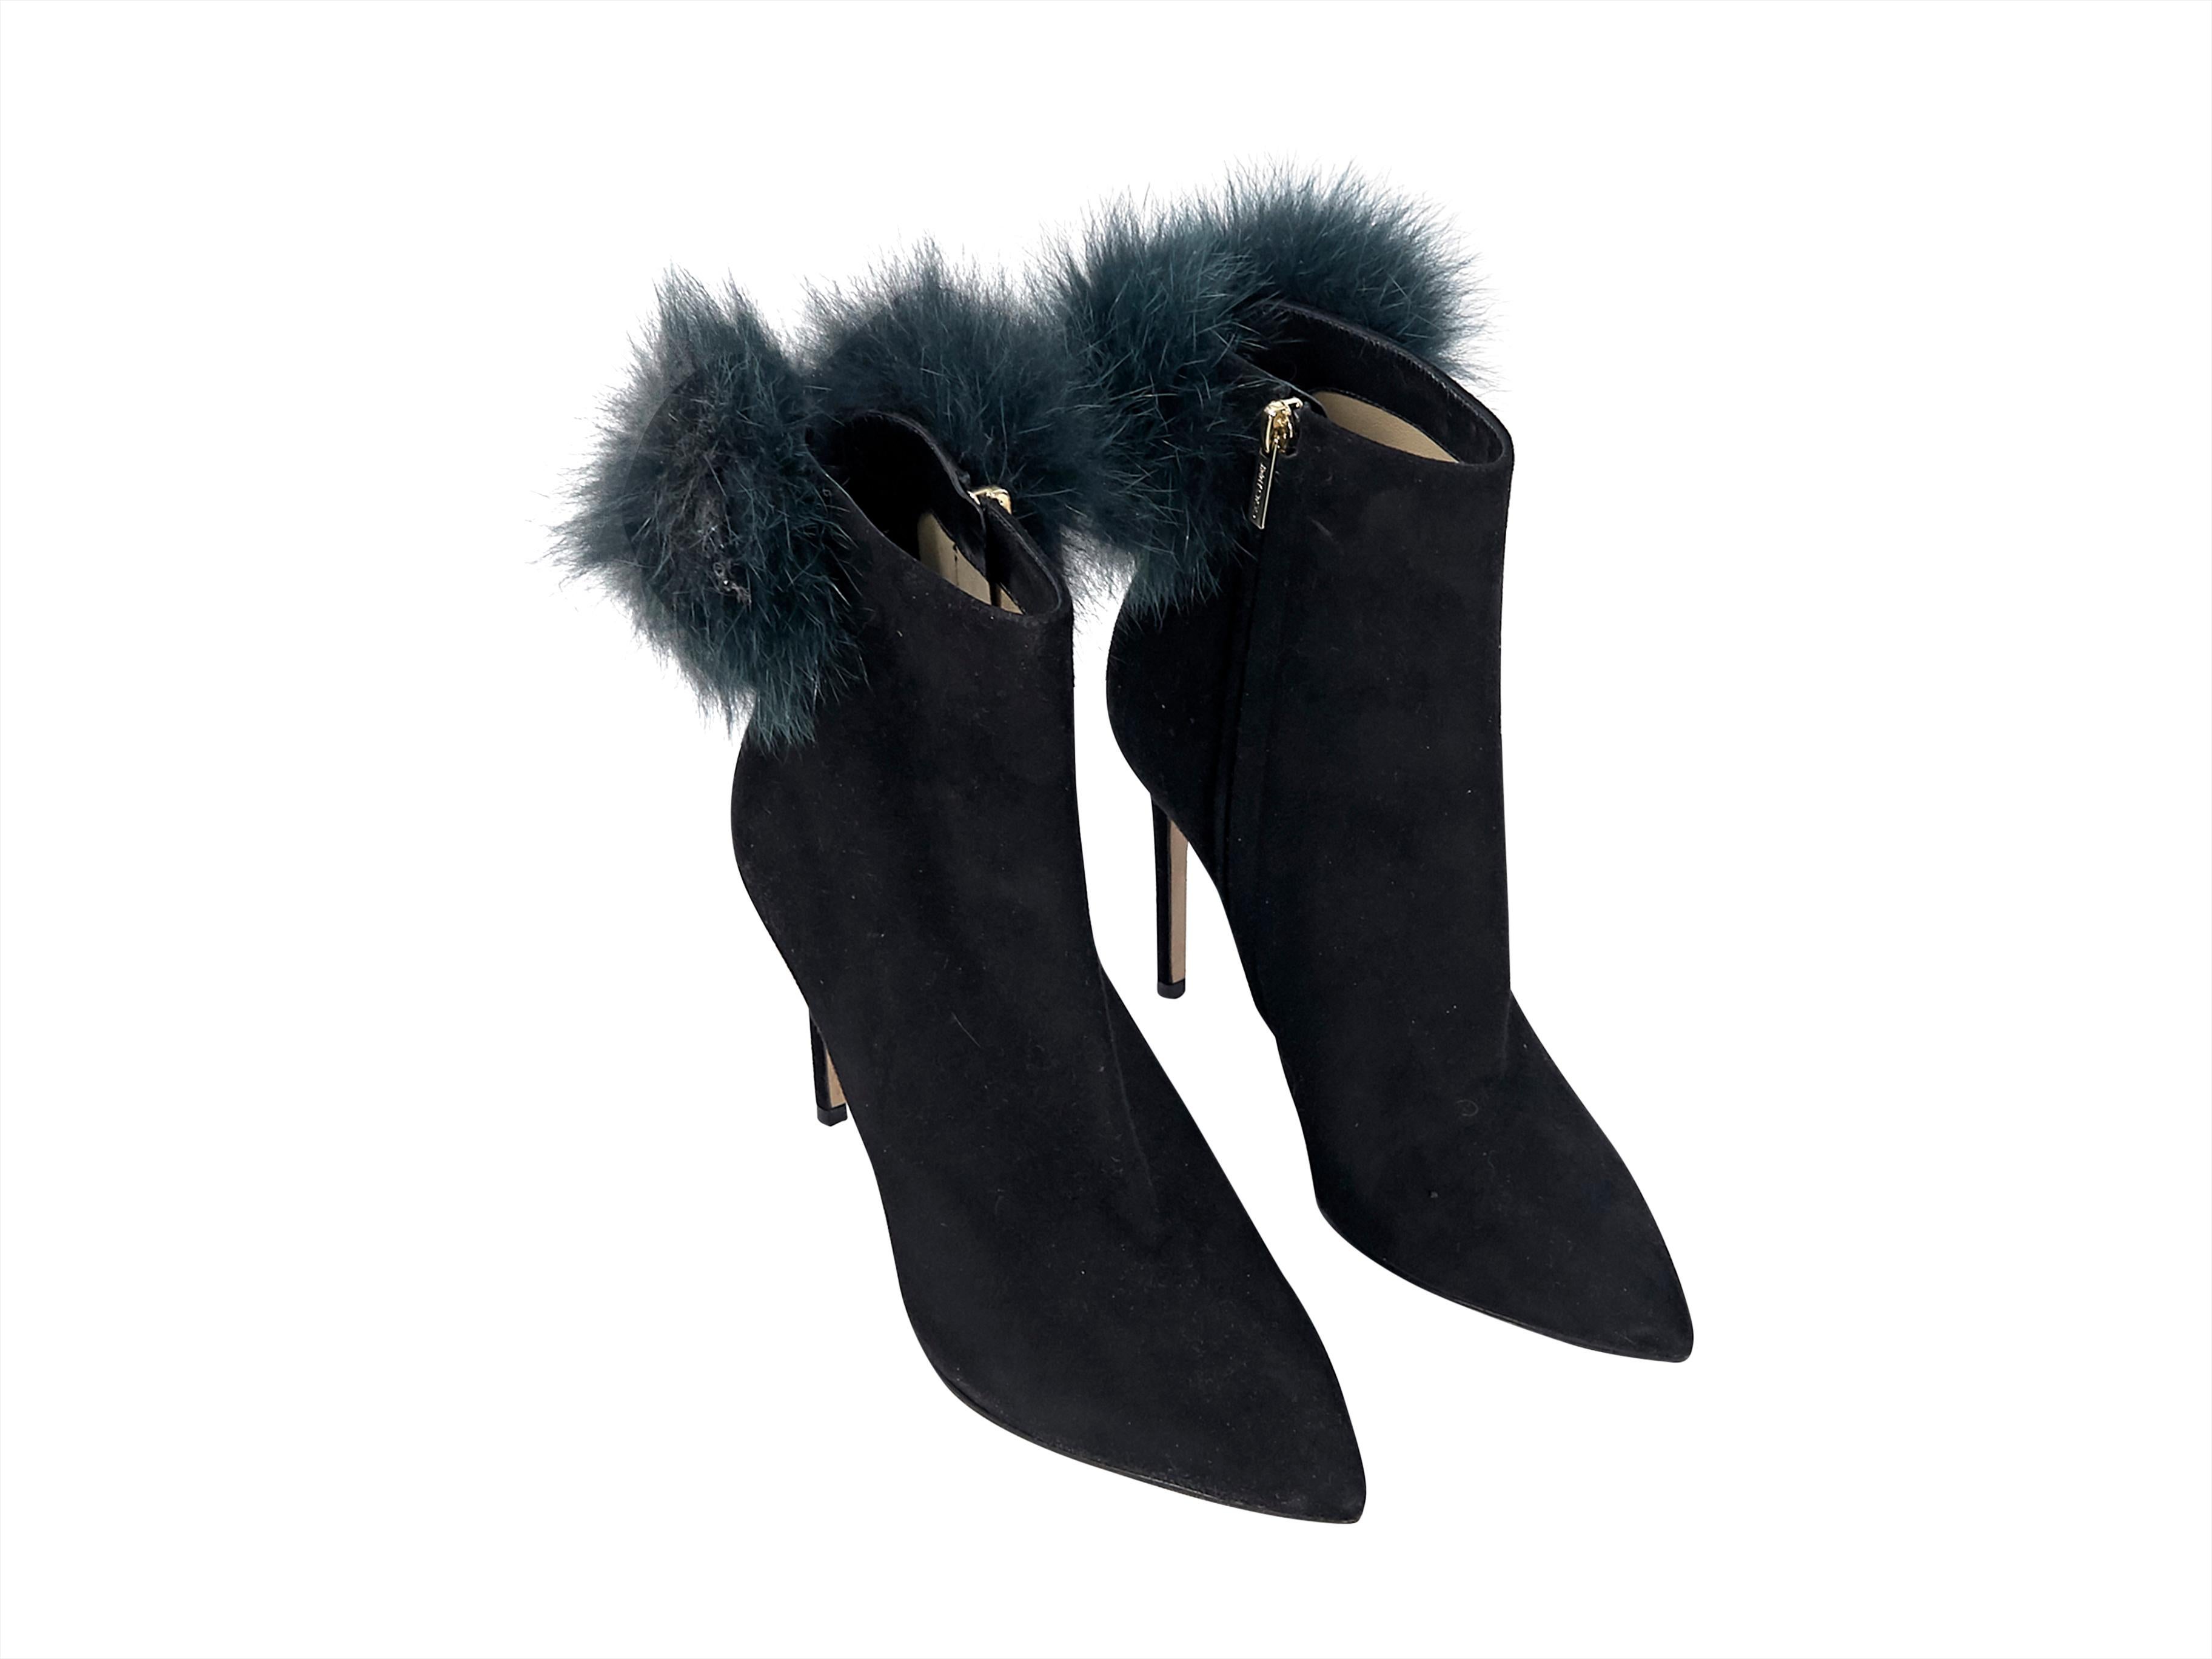 Product details: Black suede ankle boots by Jimmy Choo.  Accented with a fur pom pom.  Inner zip closure.  Point toe.  Label size IT 38.  4